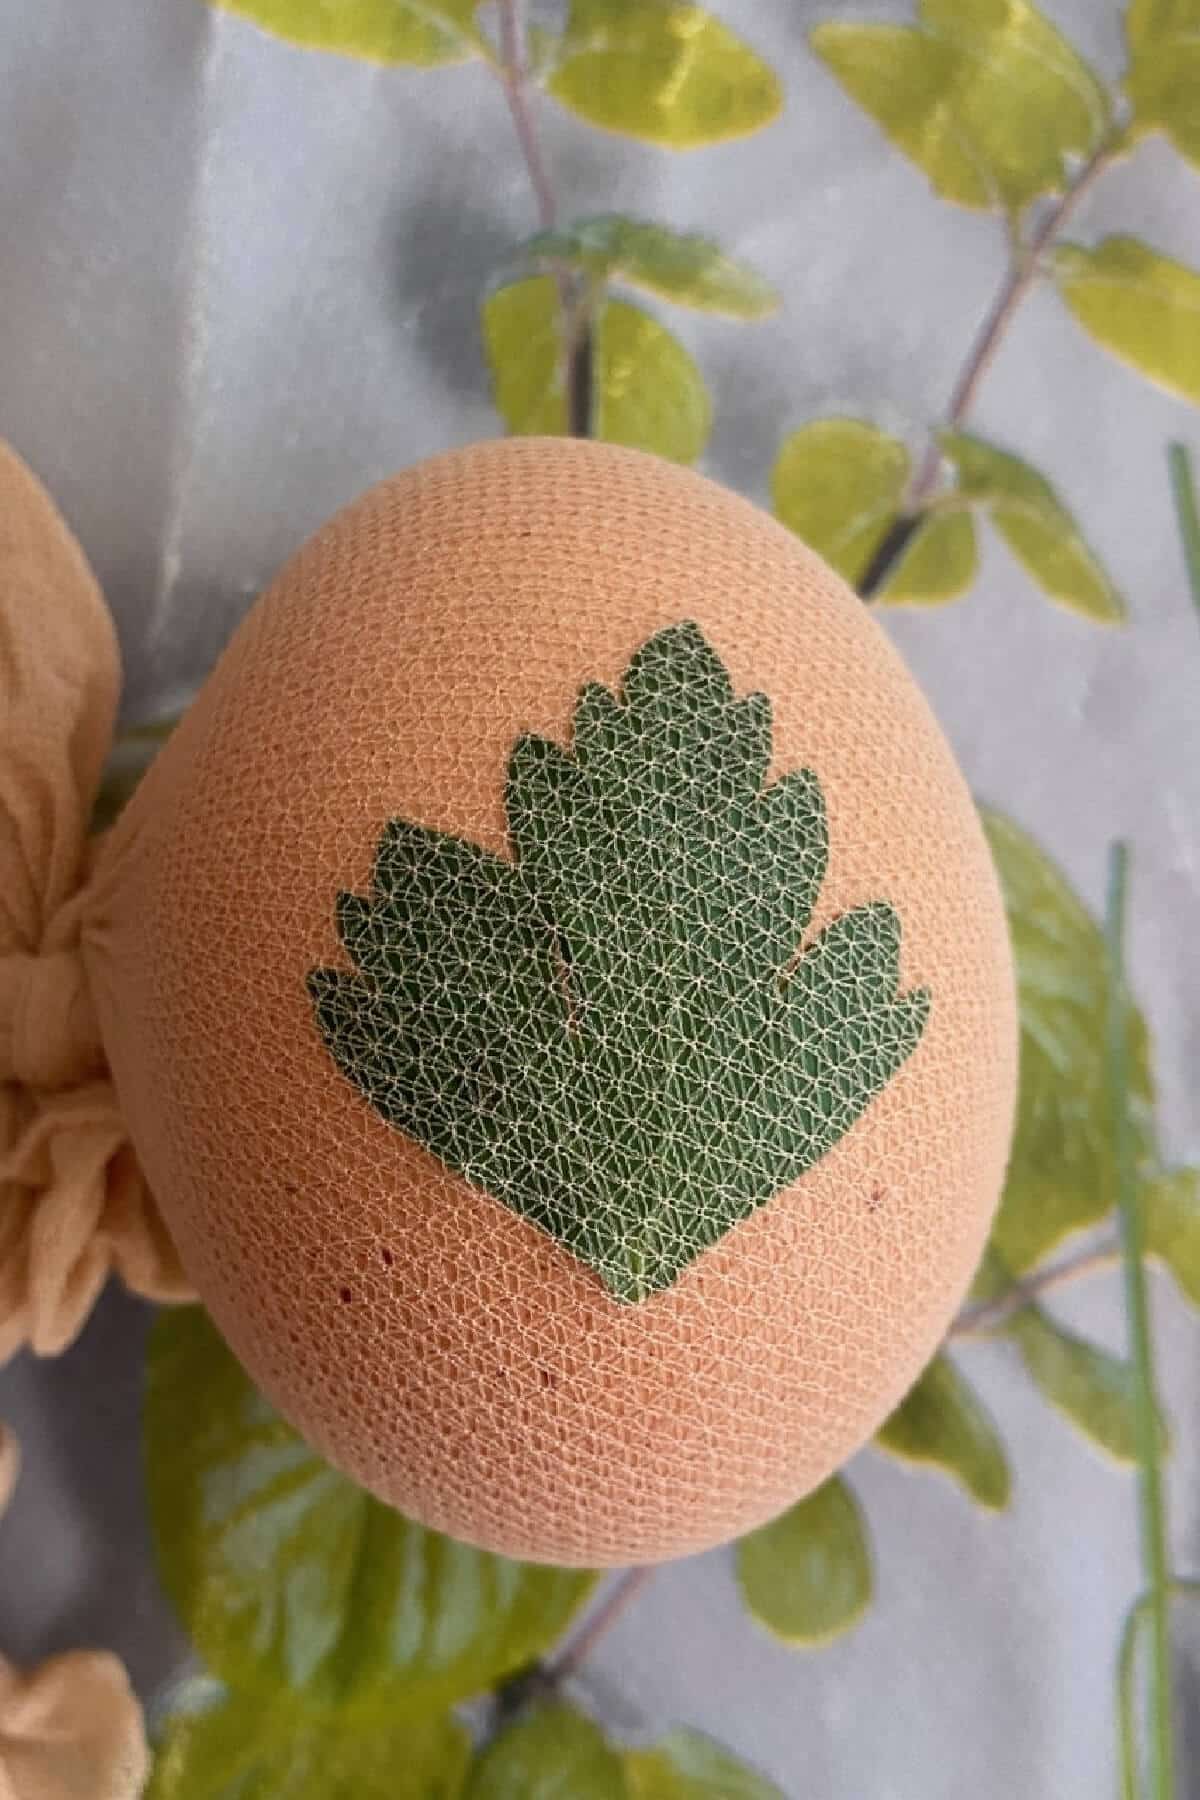 An egg with a parsley leaf on it.